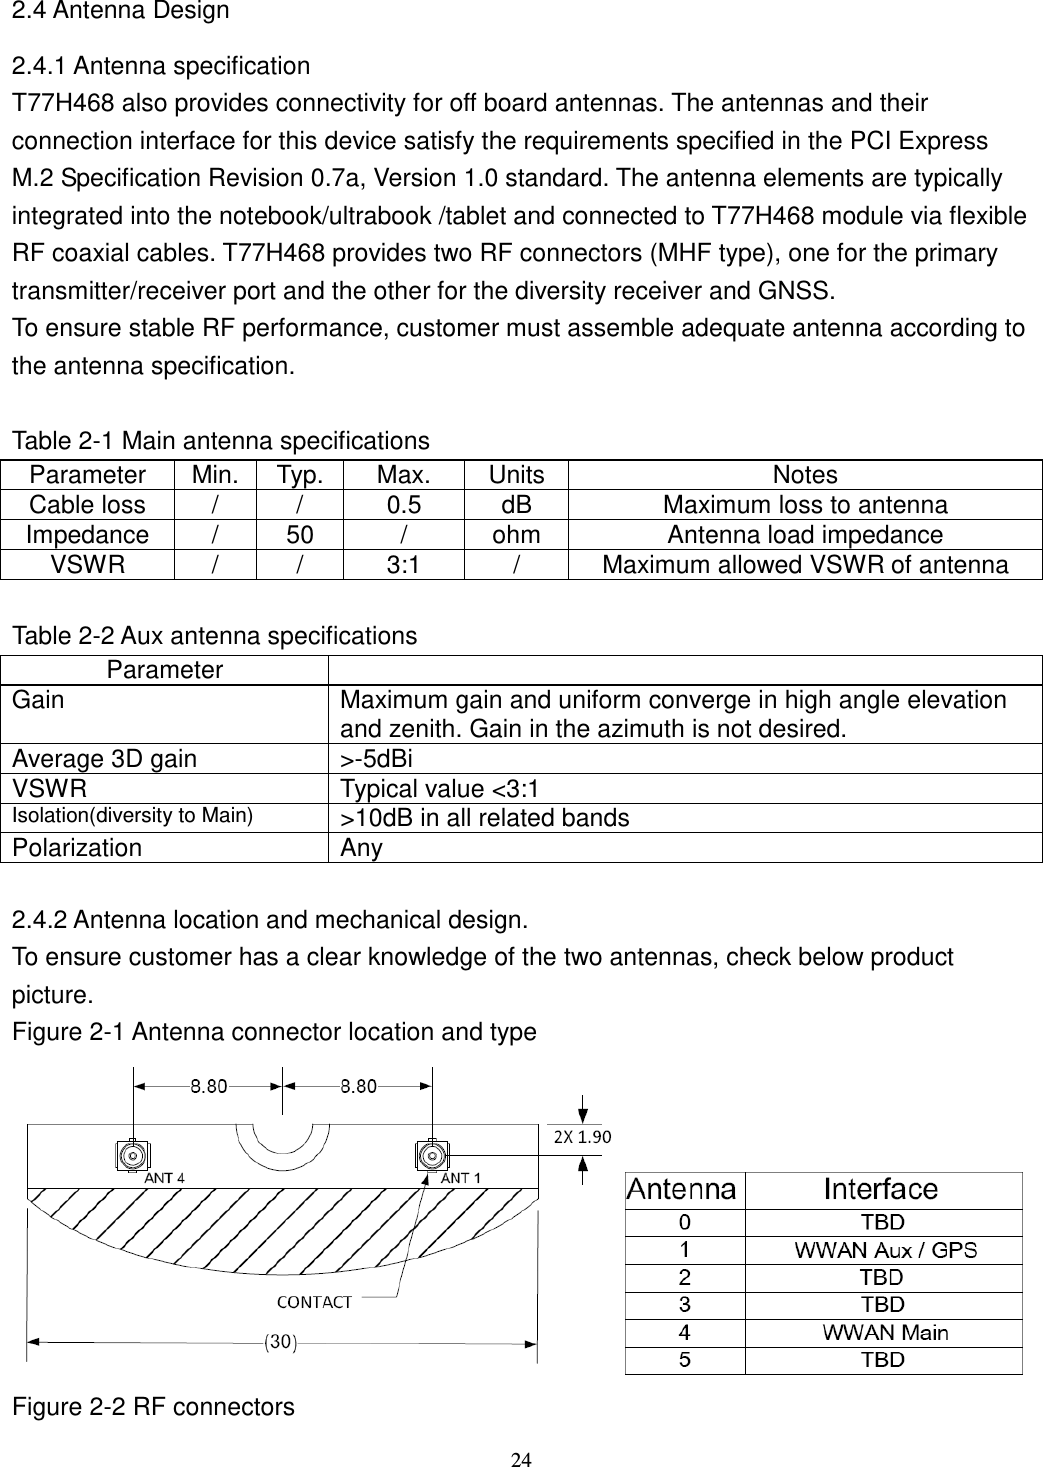    24 2.4 Antenna Design 2.4.1 Antenna specification T77H468 also provides connectivity for off board antennas. The antennas and their connection interface for this device satisfy the requirements specified in the PCI Express M.2 Specification Revision 0.7a, Version 1.0 standard. The antenna elements are typically integrated into the notebook/ultrabook /tablet and connected to T77H468 module via flexible RF coaxial cables. T77H468 provides two RF connectors (MHF type), one for the primary transmitter/receiver port and the other for the diversity receiver and GNSS.   To ensure stable RF performance, customer must assemble adequate antenna according to the antenna specification.  Table 2-1 Main antenna specifications Parameter  Min.  Typ.  Max.  Units  Notes Cable loss  /  /  0.5  dB  Maximum loss to antenna Impedance  /  50  /  ohm  Antenna load impedance VSWR  /  /  3:1  /  Maximum allowed VSWR of antenna  Table 2-2 Aux antenna specifications Parameter   Gain  Maximum gain and uniform converge in high angle elevation and zenith. Gain in the azimuth is not desired. Average 3D gain  &gt;-5dBi VSWR  Typical value &lt;3:1 Isolation(diversity to Main) &gt;10dB in all related bands Polarization  Any  2.4.2 Antenna location and mechanical design.   To ensure customer has a clear knowledge of the two antennas, check below product picture. Figure 2-1 Antenna connector location and type  Figure 2-2 RF connectors 